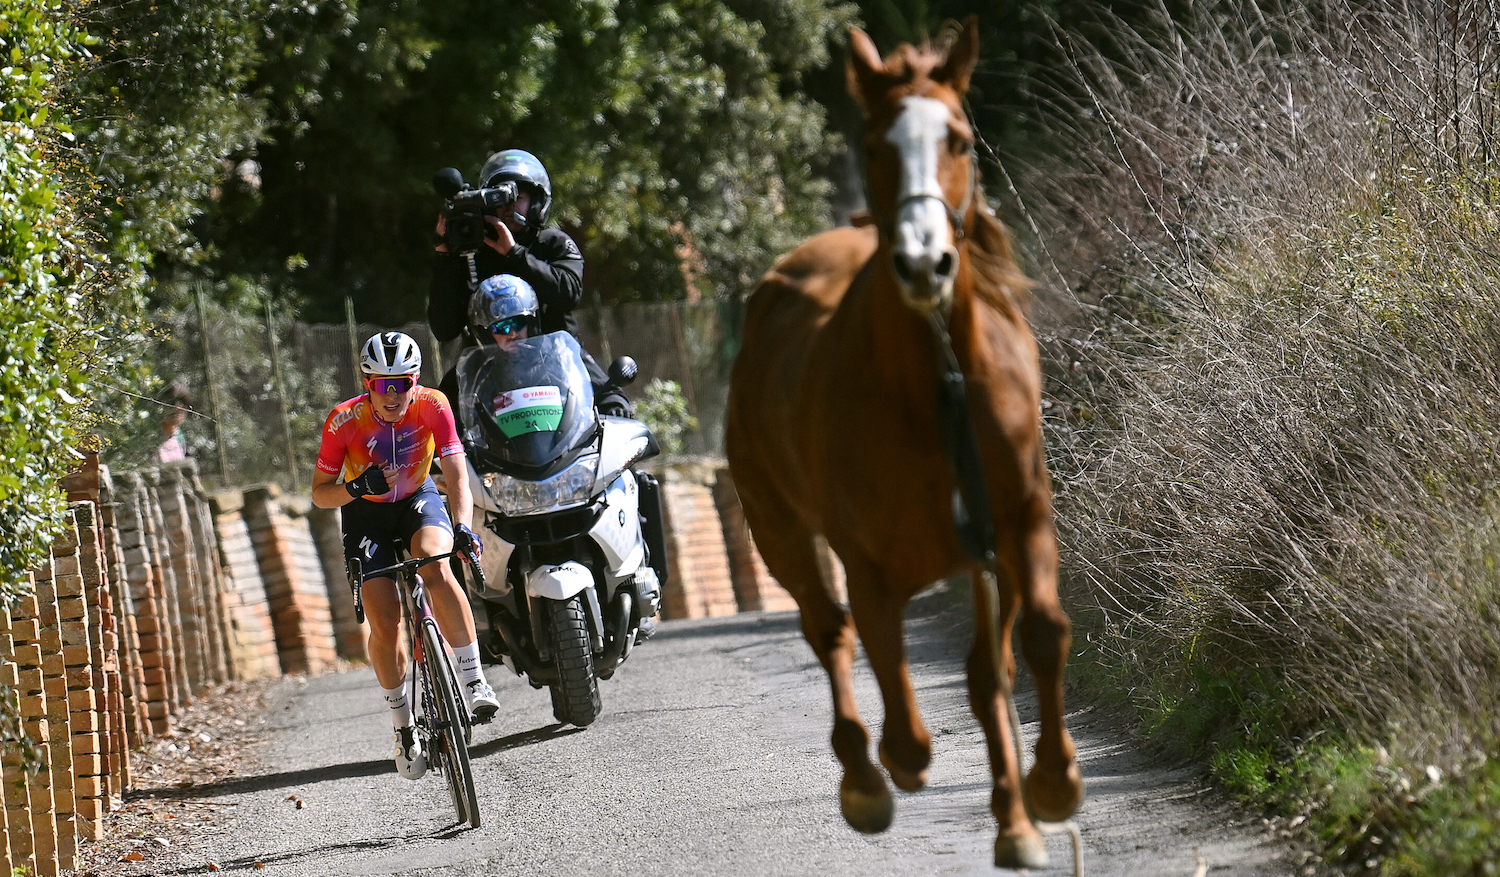 SIENA, ITALY - MARCH 04: Demi Vollering of The Netherlands and Team SD Worx attacks while a horse gallops beside her during the Eroica - 9th Strade Bianche 2023, Women's a 136km one day race from Siena to Siena 318m / #StradeBianche / on March 04, 2023 in Siena, Italy. (Photo by Luc Claessen/Getty Images)